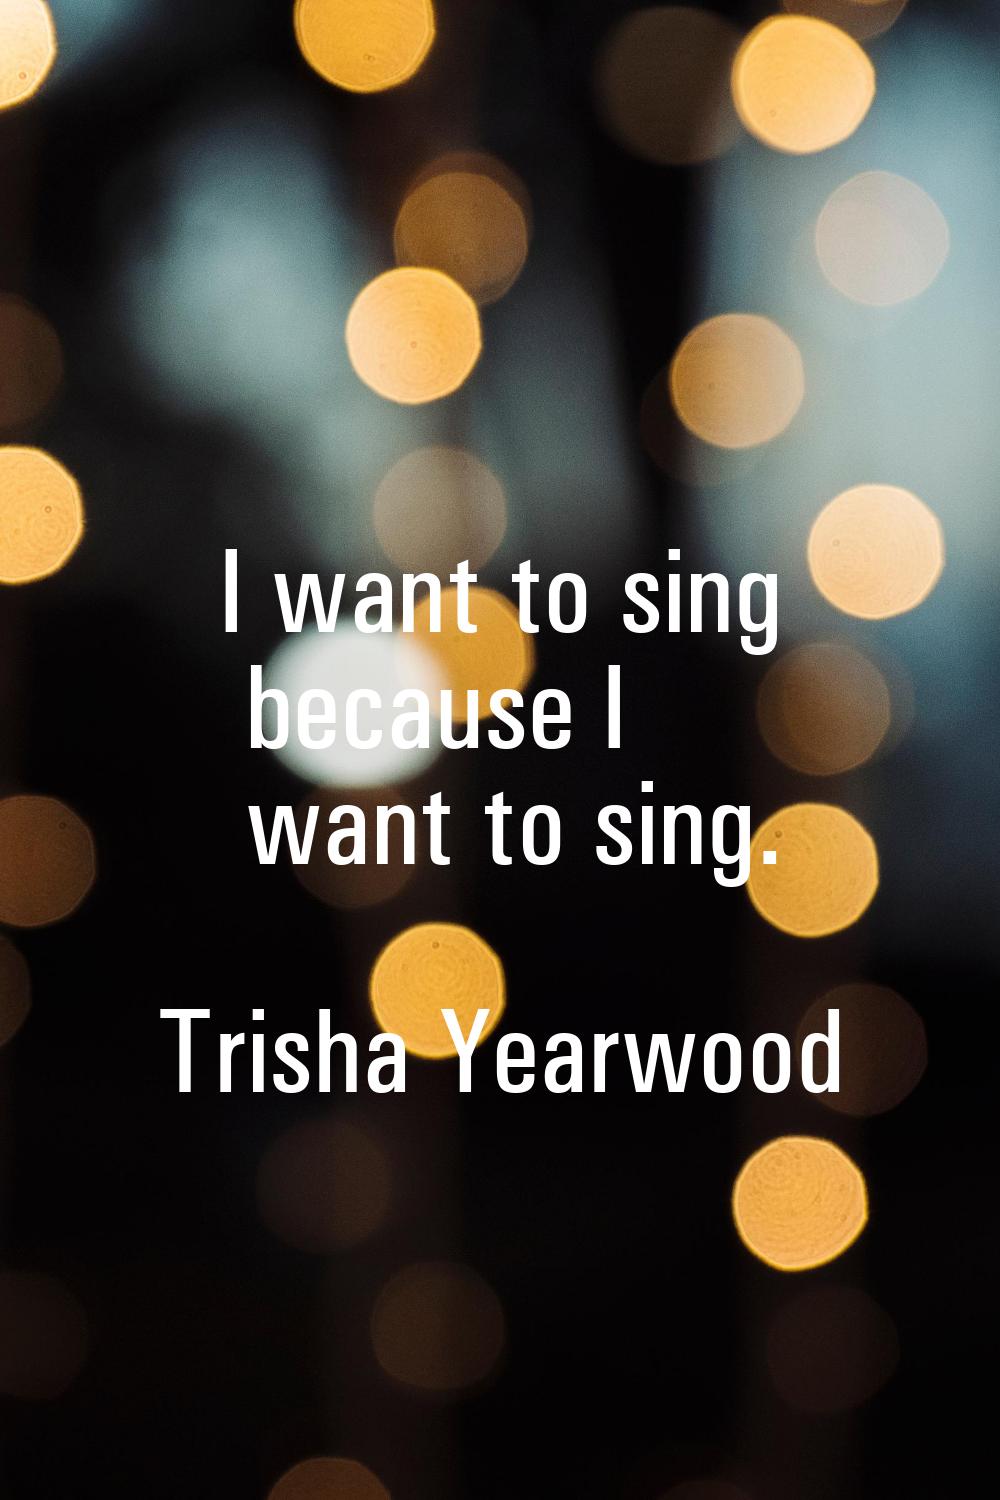 I want to sing because I want to sing.